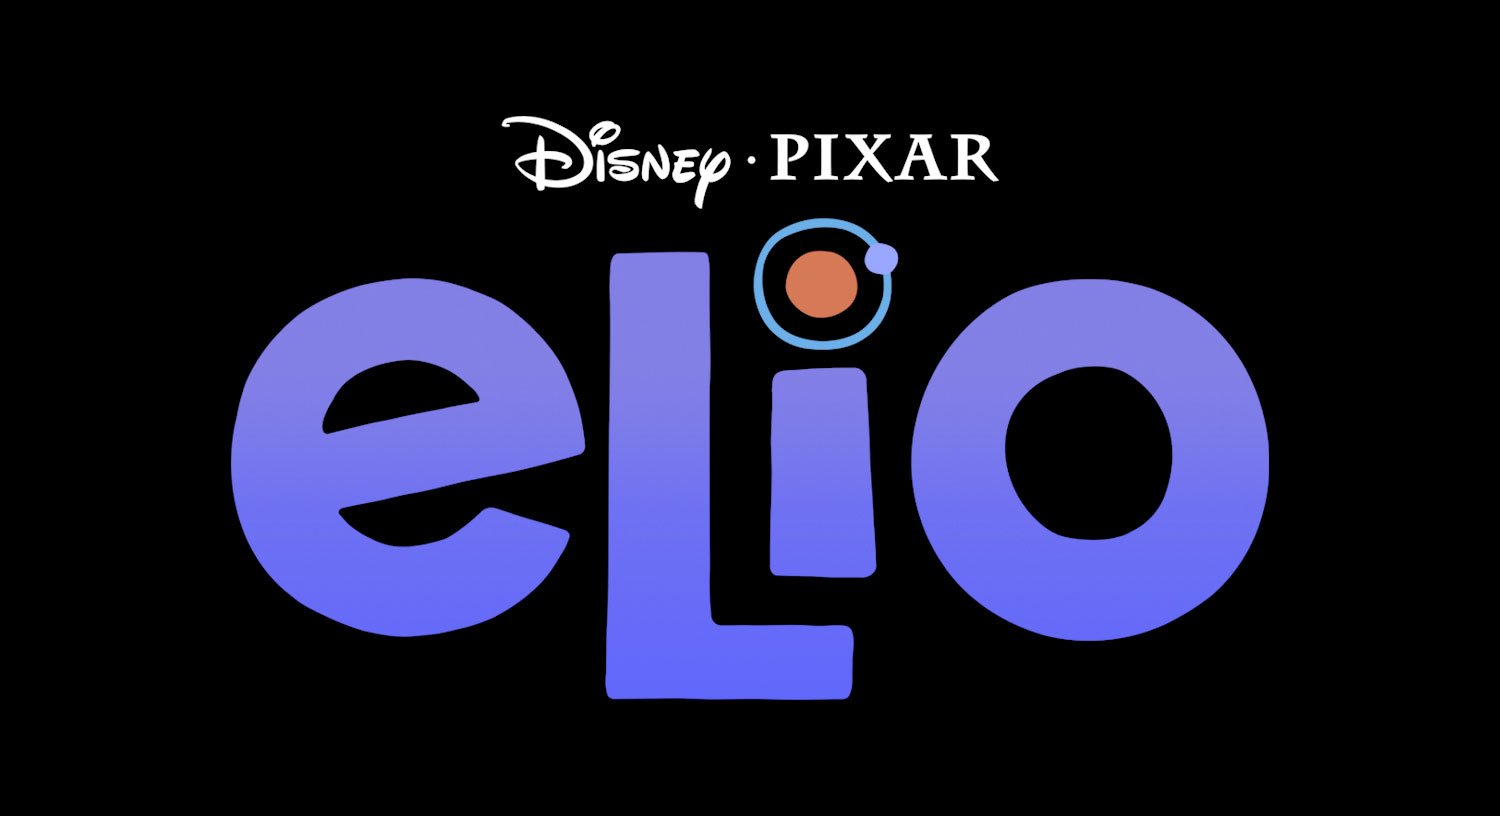 Pixar's Next 7 Films – Release Dates From 2020-2024 with Director